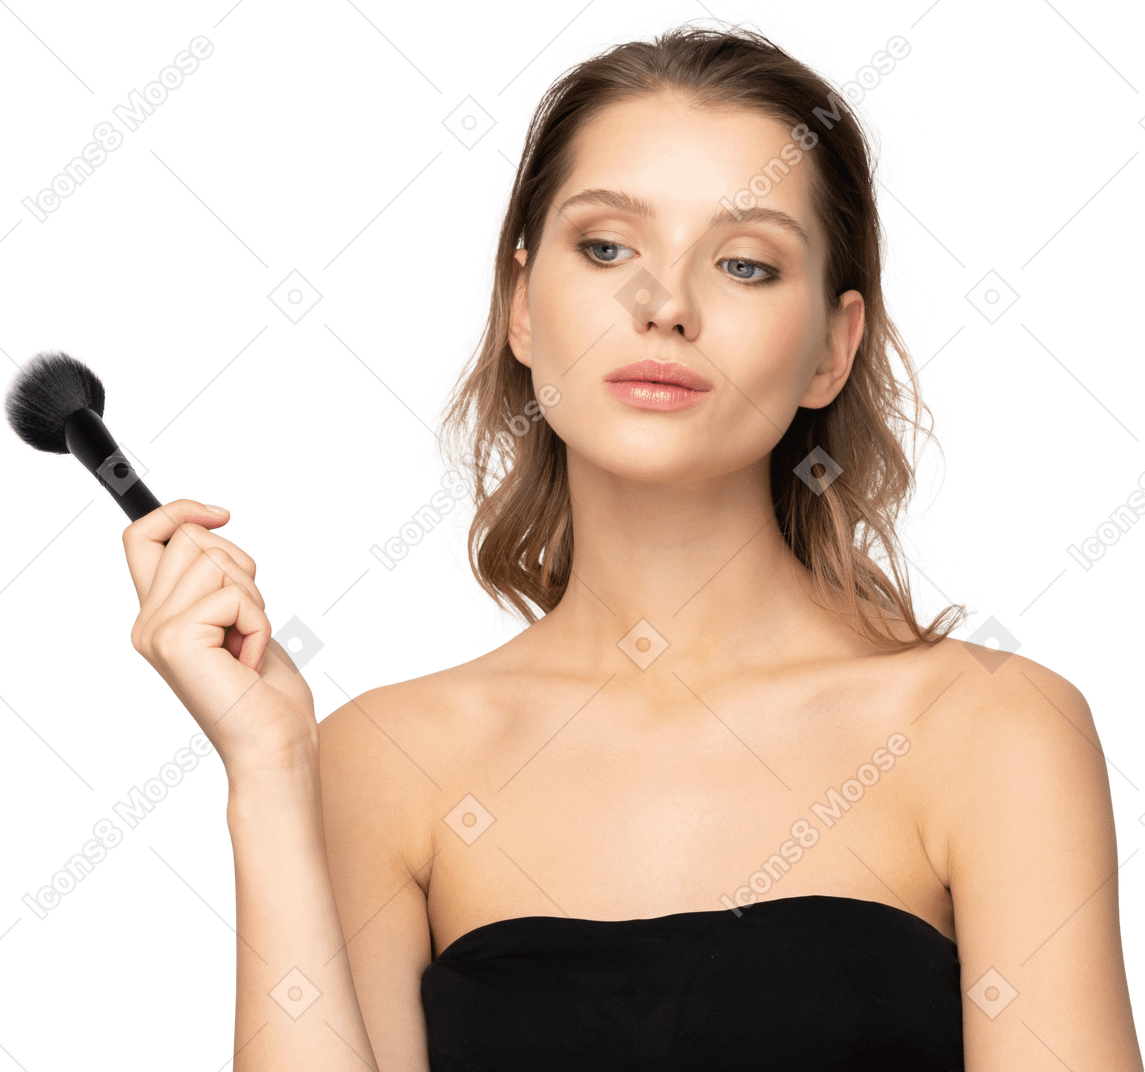 Front view of a thoughtful sensual young woman holding a make-up brush